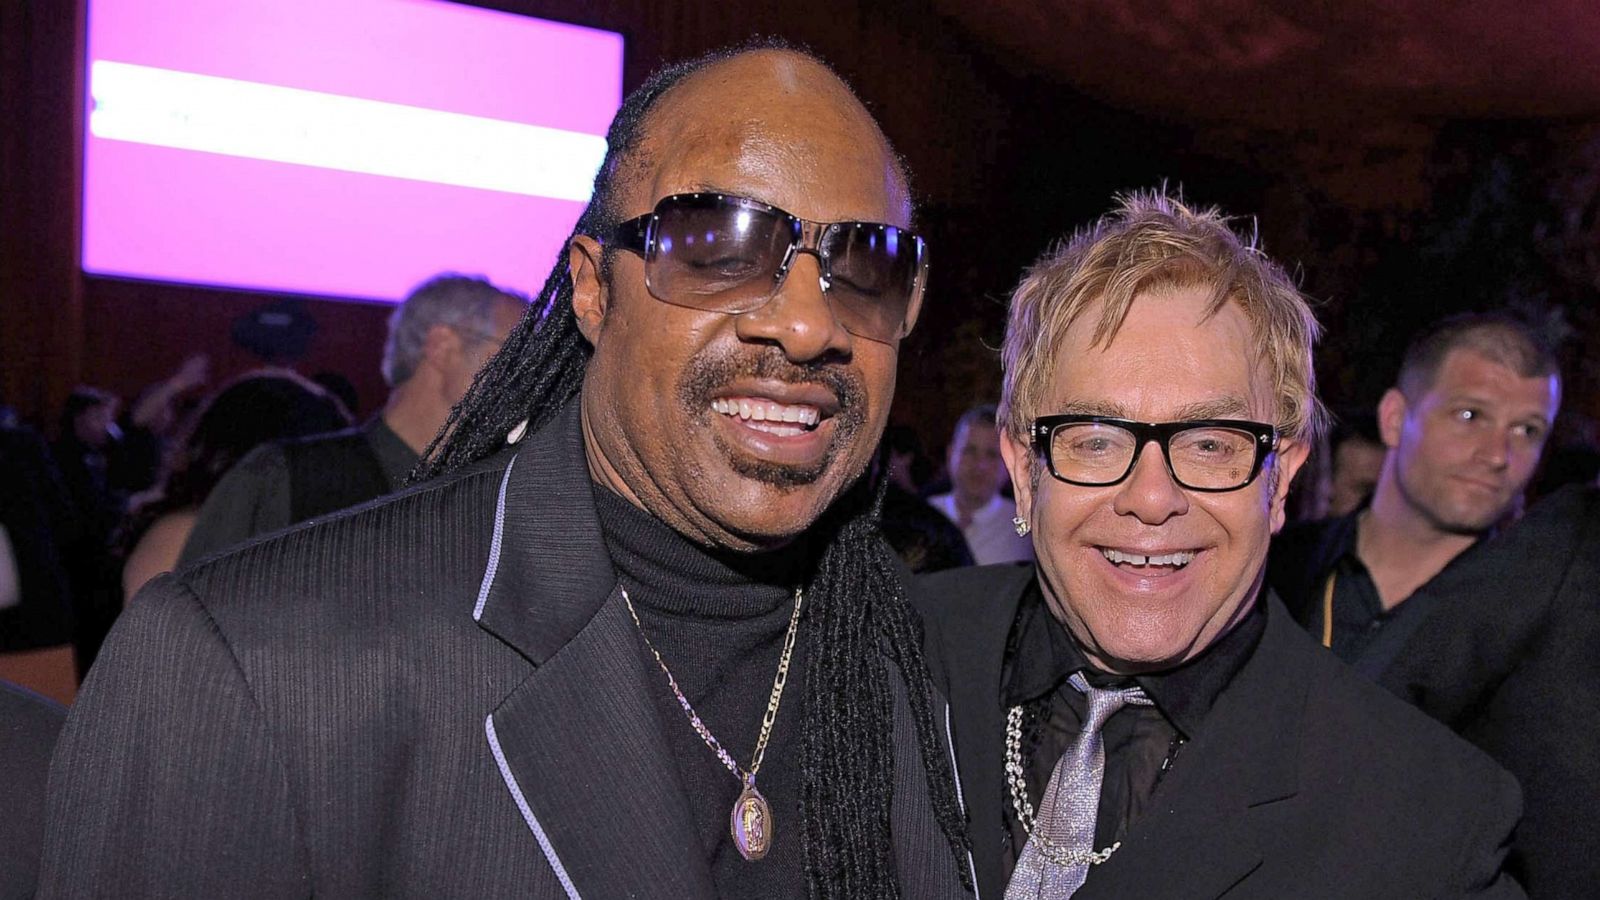 PHOTO: Stevie Wonder and Elton John attend the 16th Annual Elton John AIDS Foundation Academy Awards viewing party at the Pacific Design Center on Feb. 24, 2008 in West Hollywood, Calif.